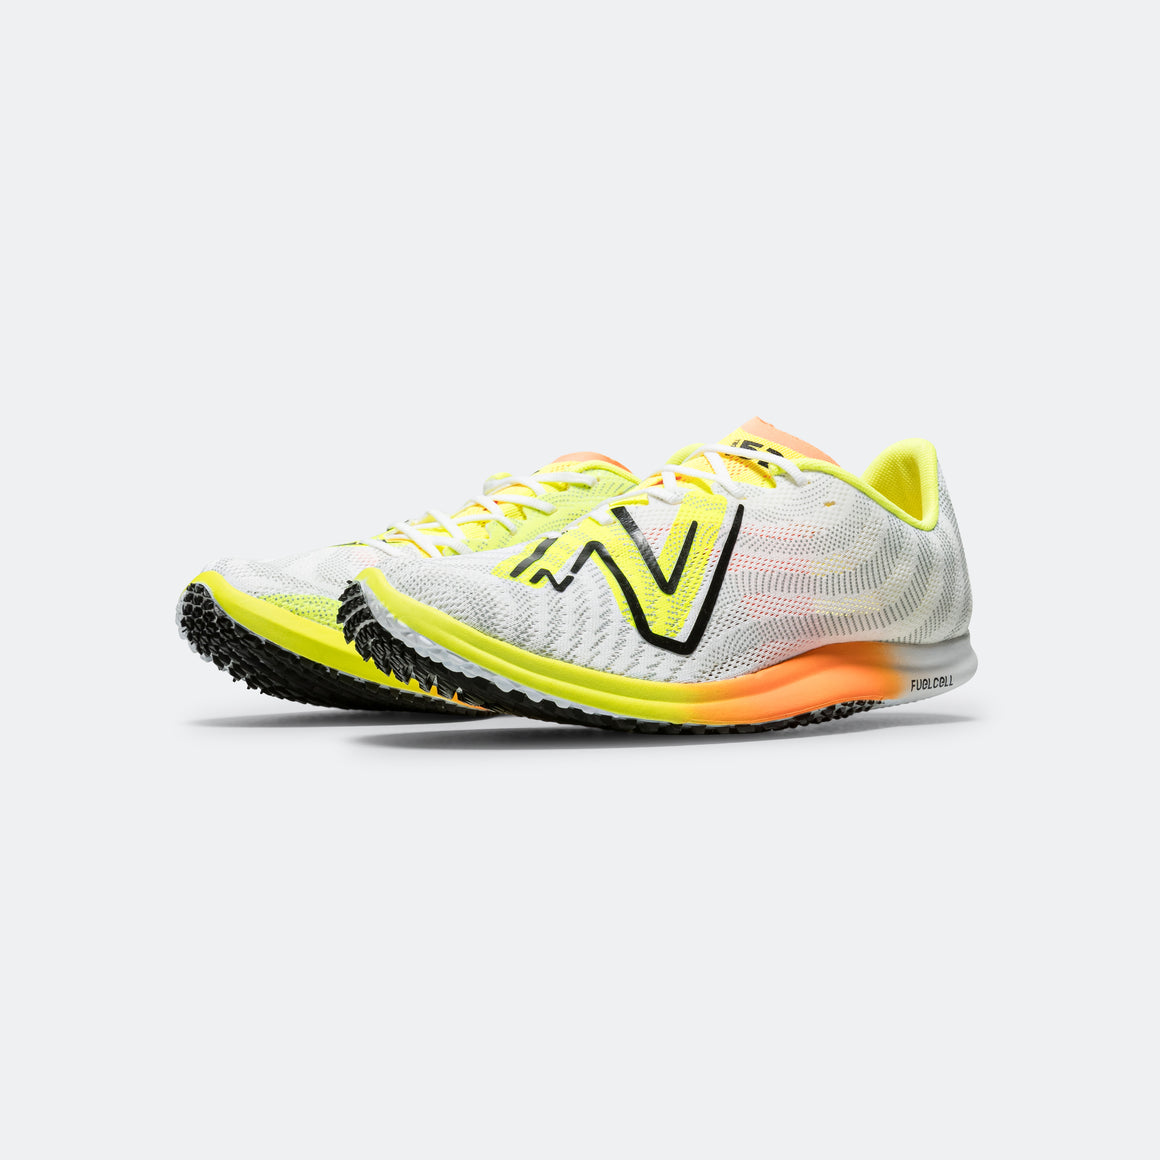 New Balance - Mens FuelCell 5280 v2 - White/Lime - Up There Athletics